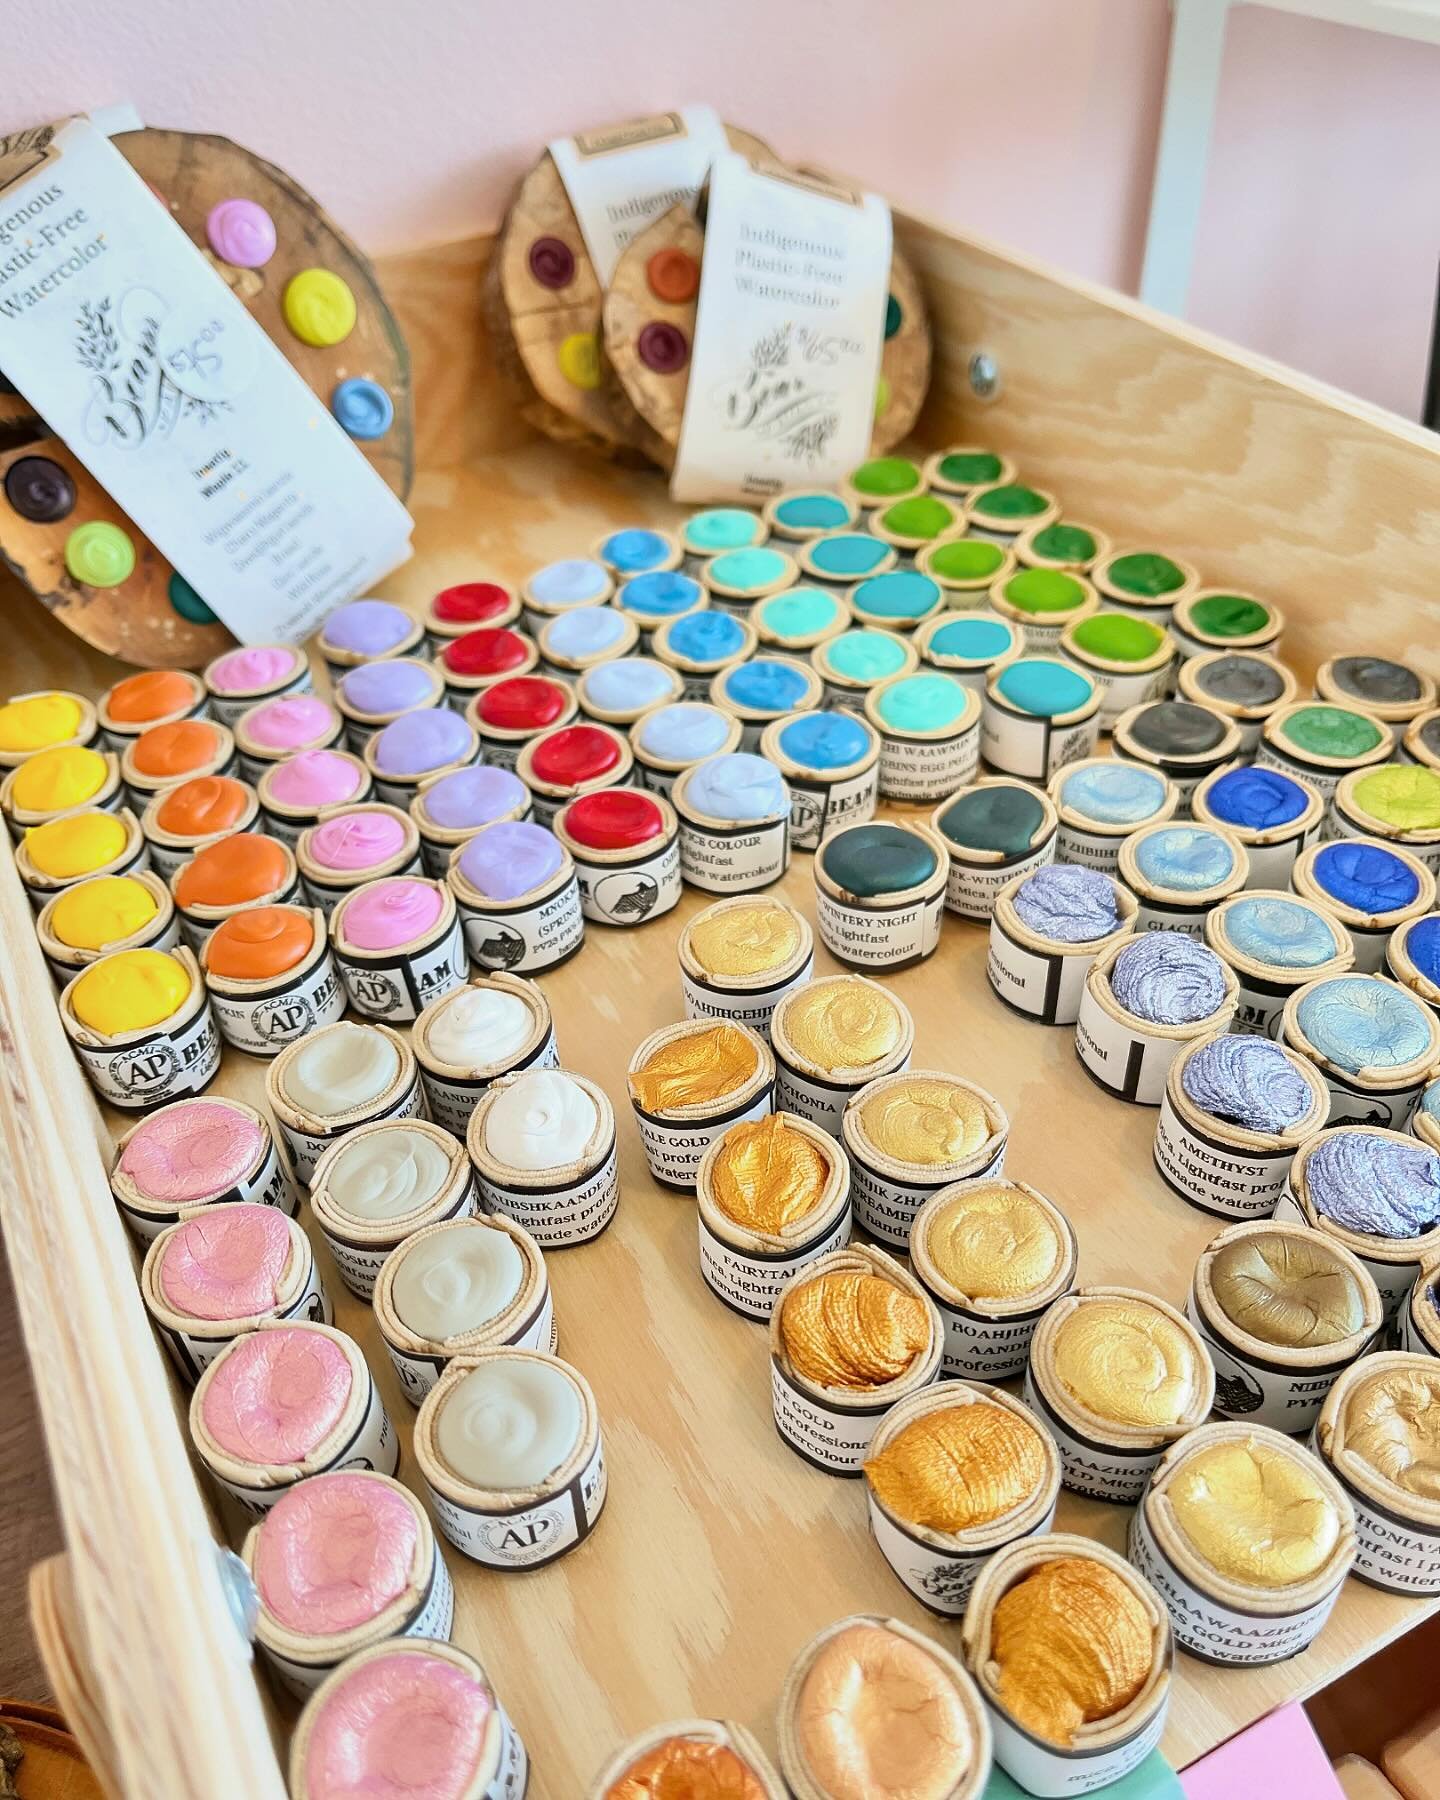 We ❤️ BEAM PAINTS more than any paints. #sorrynotsorry Made right here in M&rsquo;Chigeeng First Nation on Manitoulin Island. 

&bull;Lightfast watercolours ❤️
&bull;Handmade ❤️
&bull;Plastic-free ❤️
&bull;Indigenous-made ❤️
&bull;Heartmade ❤️

&ldqu